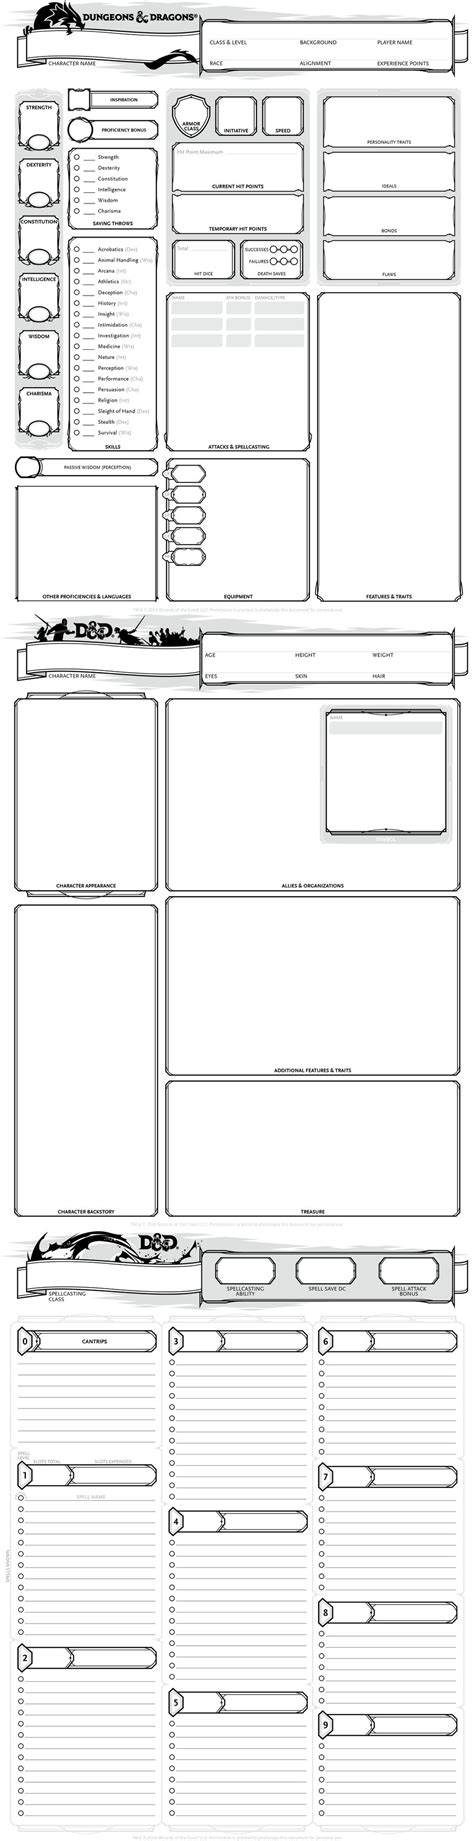 Dungeon Masters Guild Dnd character sheet, Druid dungeons and dragons